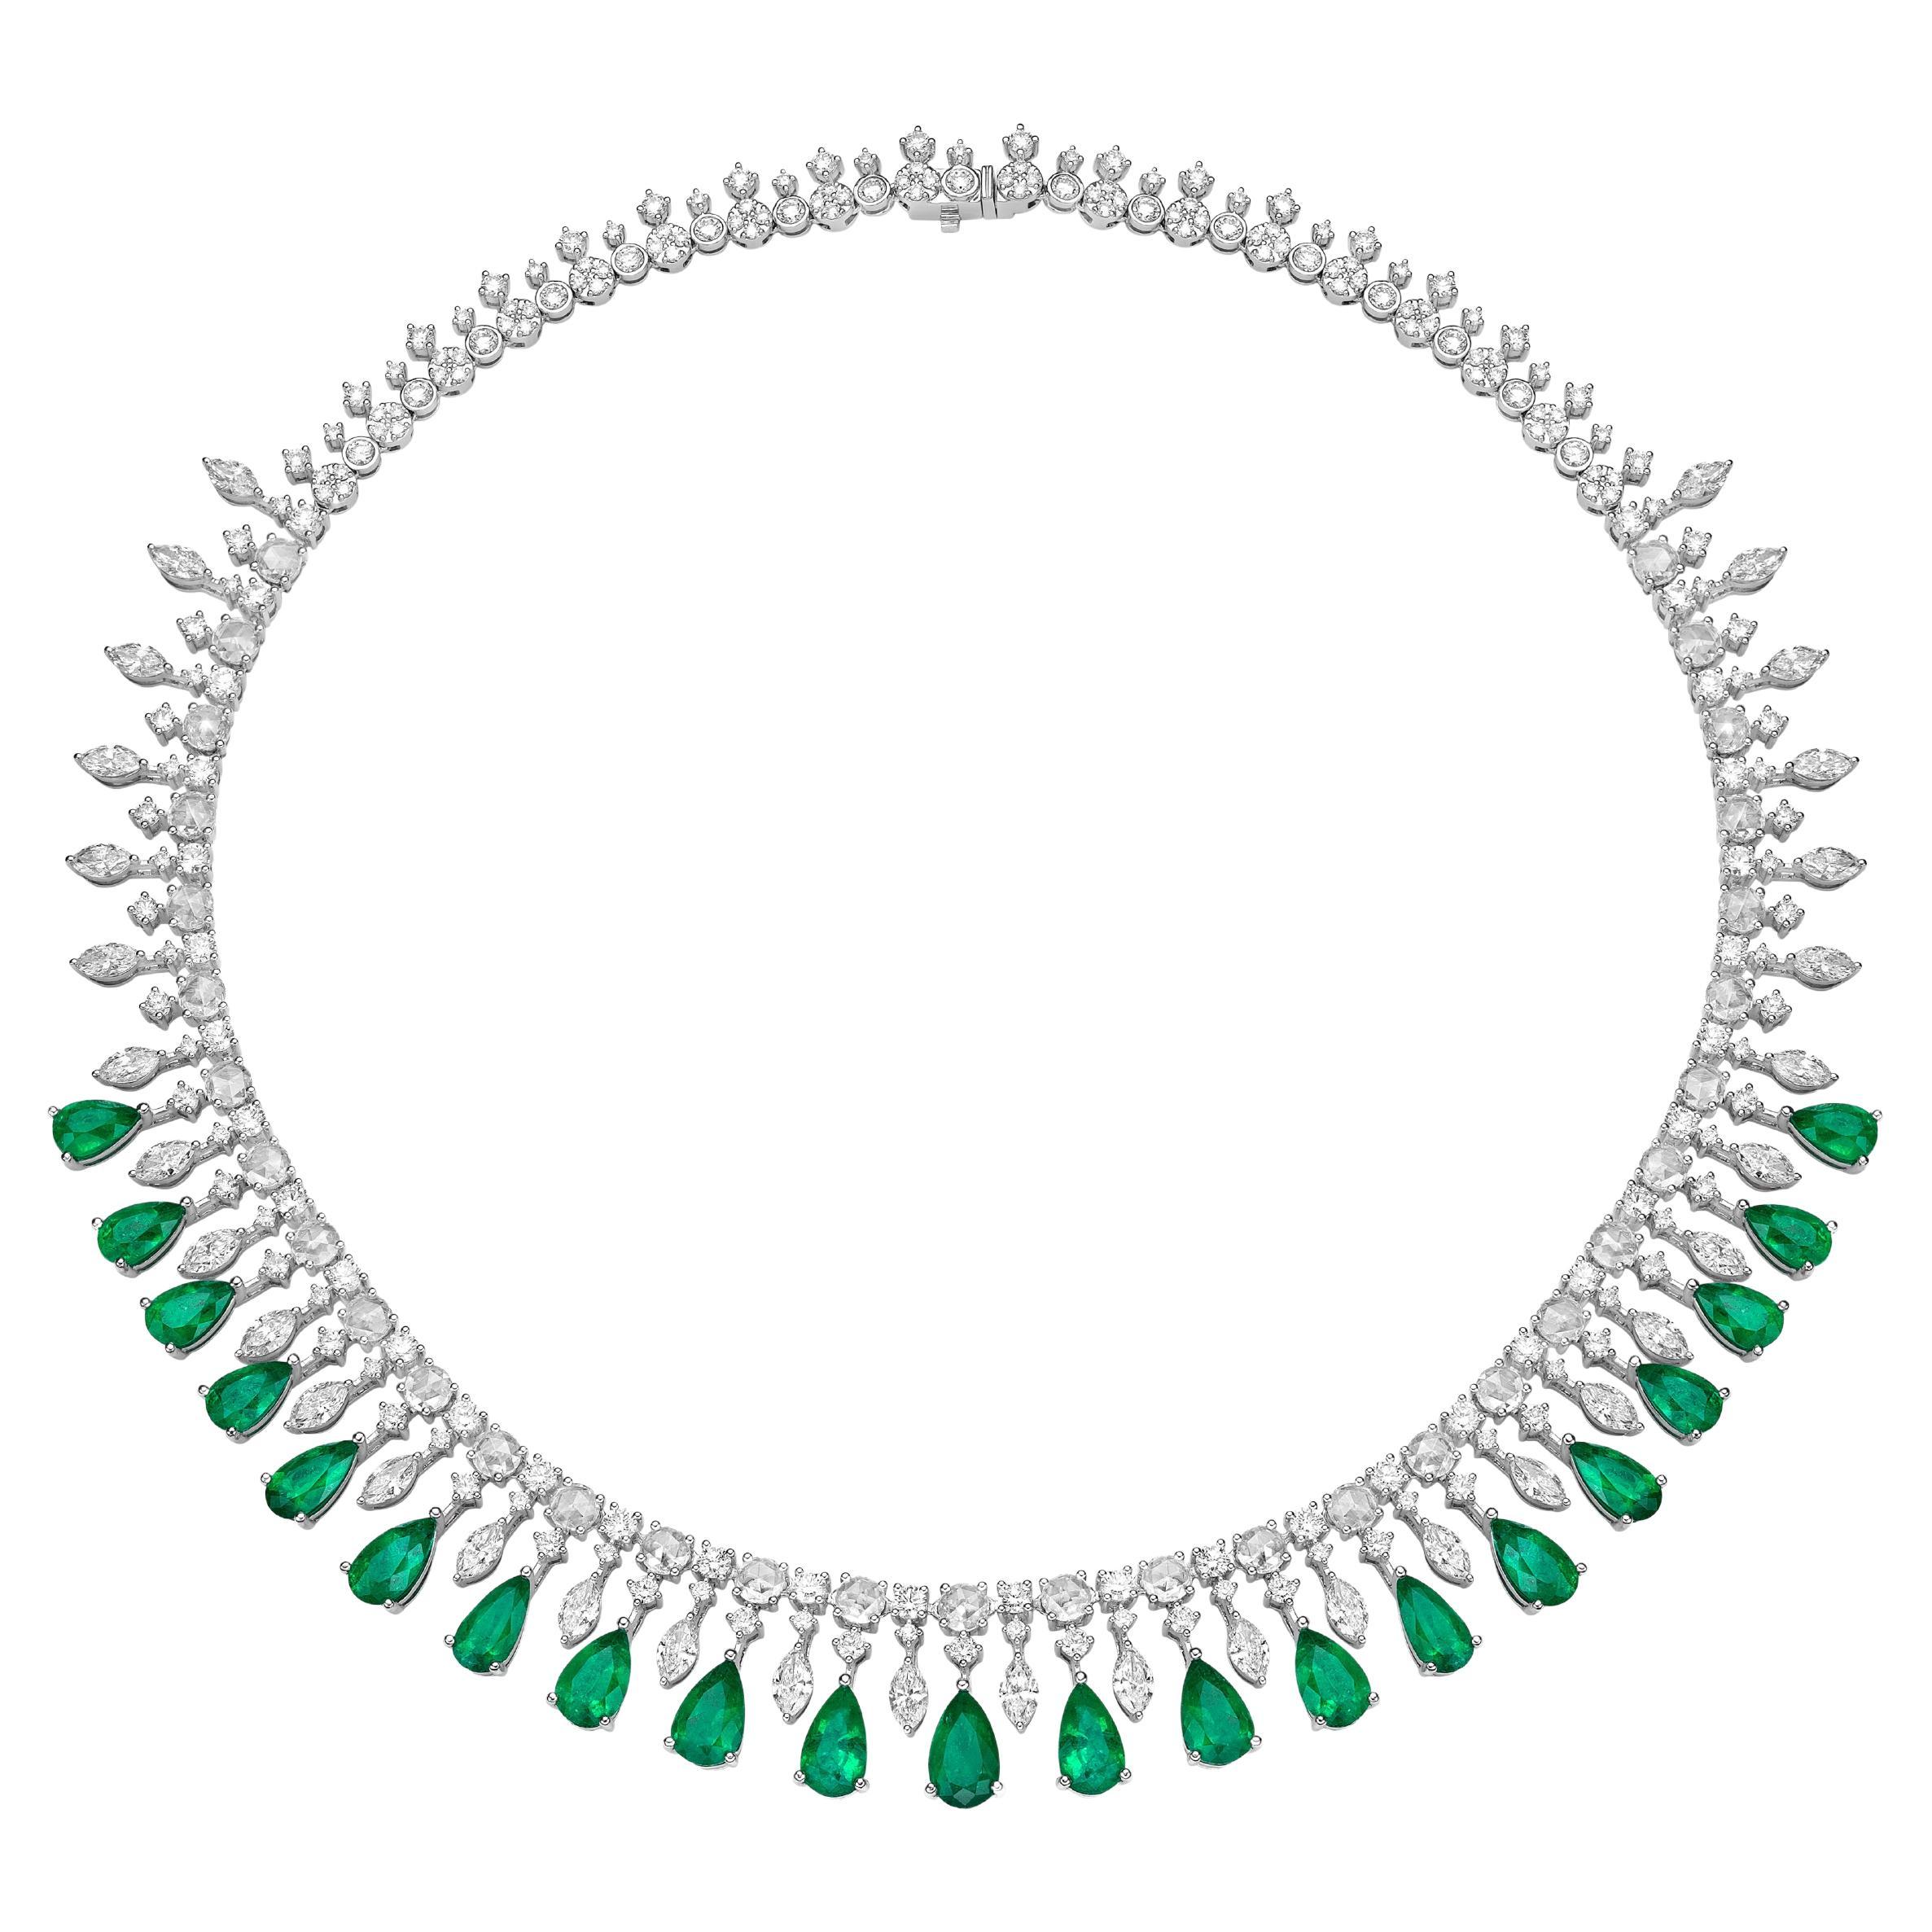 16.81 Carat Emerald Necklace in 18Karat White Gold with Diamond. For Sale